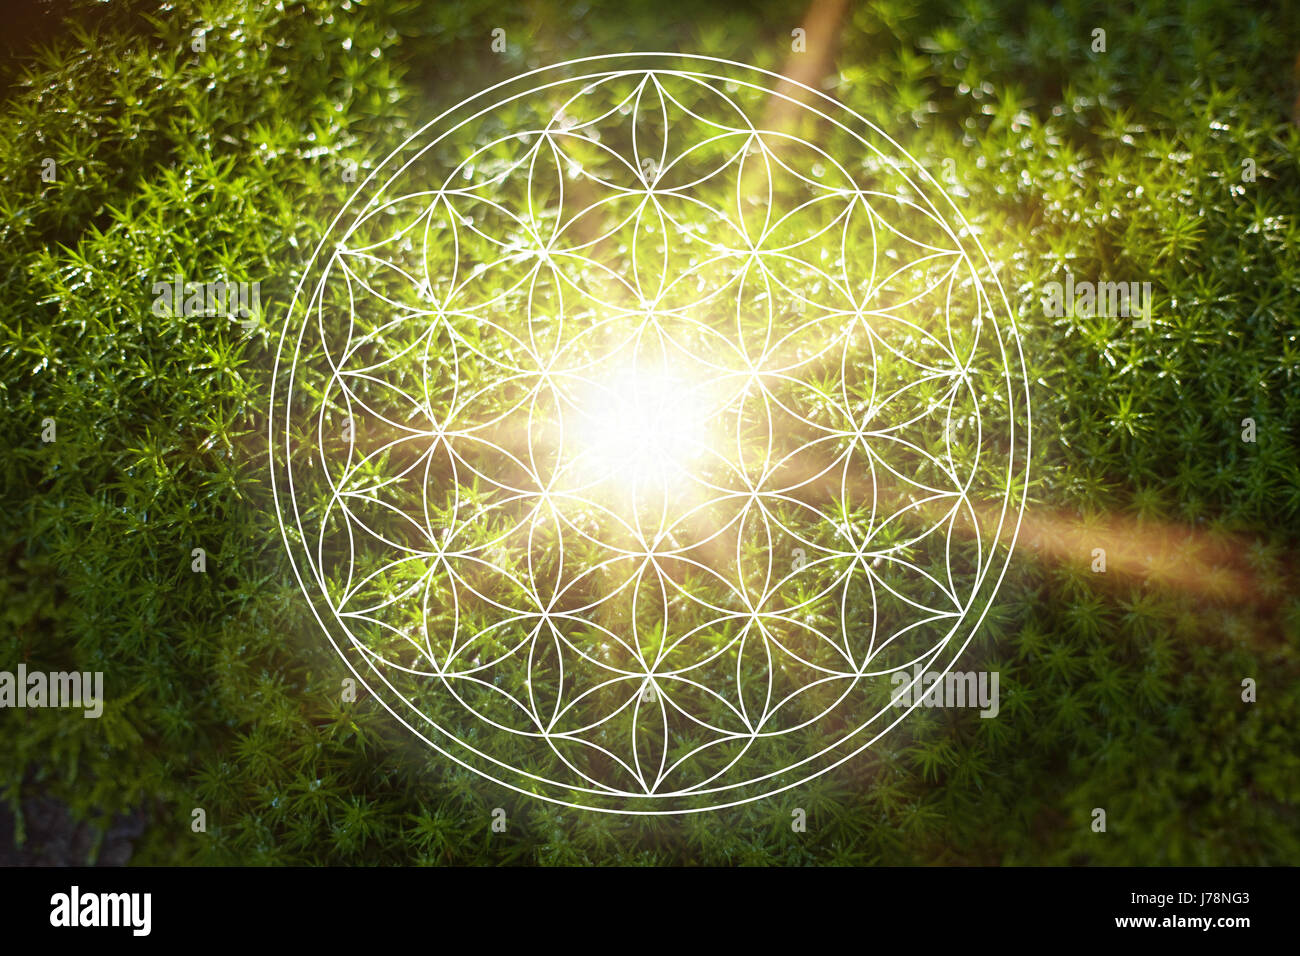 Beautiful flower of life in nature as new age energy and spirituality life force concept Stock Photo